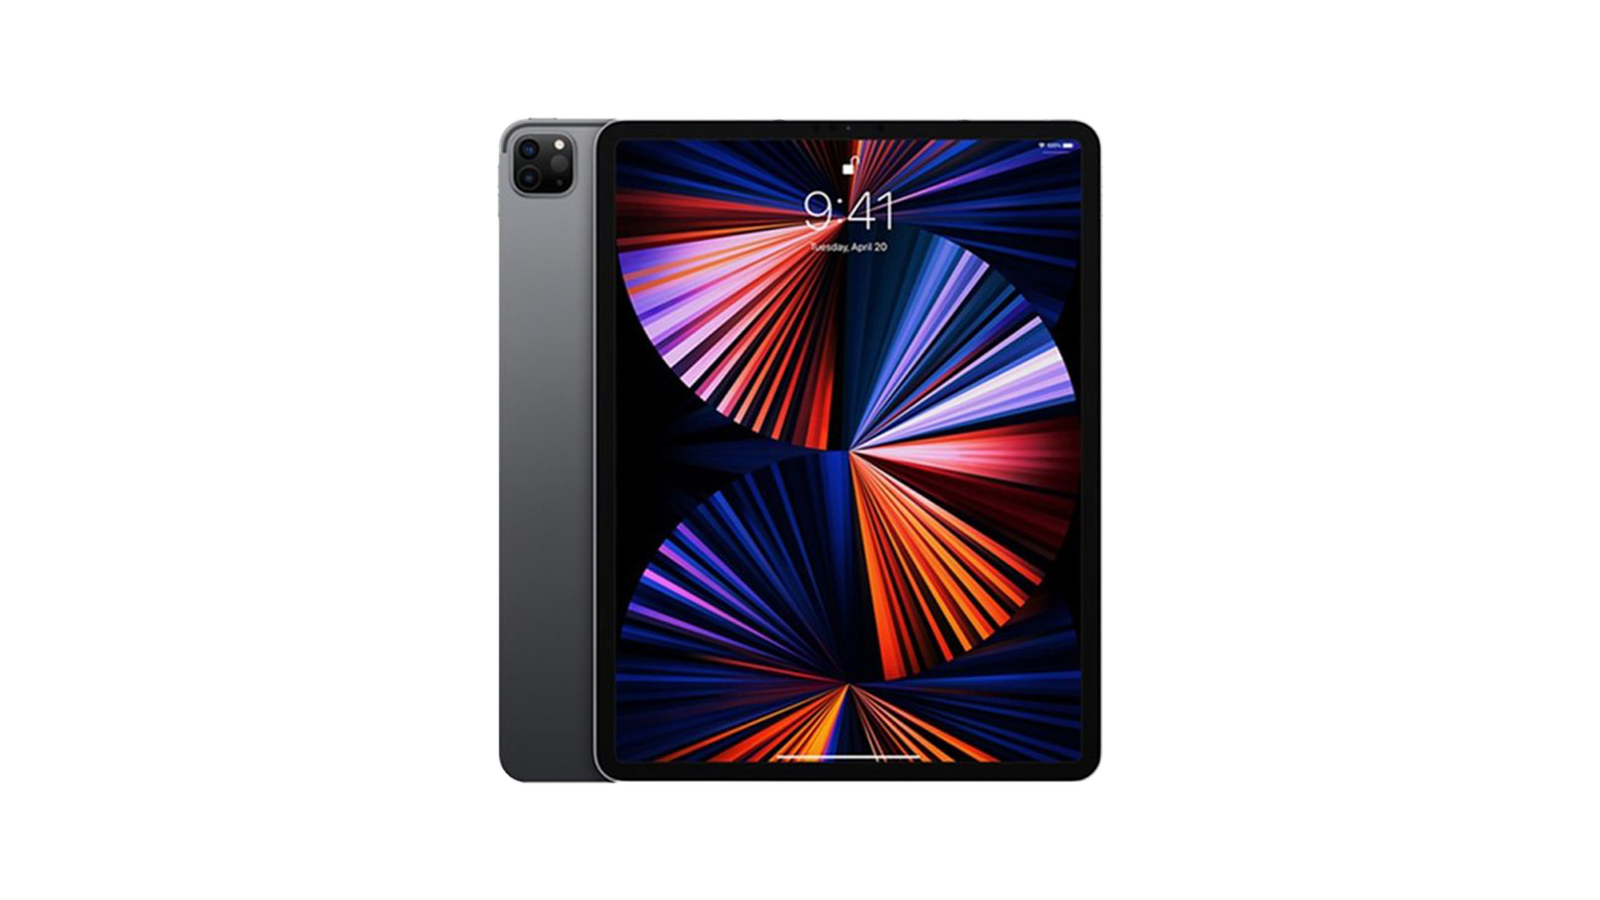 Apple iPad Pro 12.9 (2021) - The ideal tablet for students taking professional courses